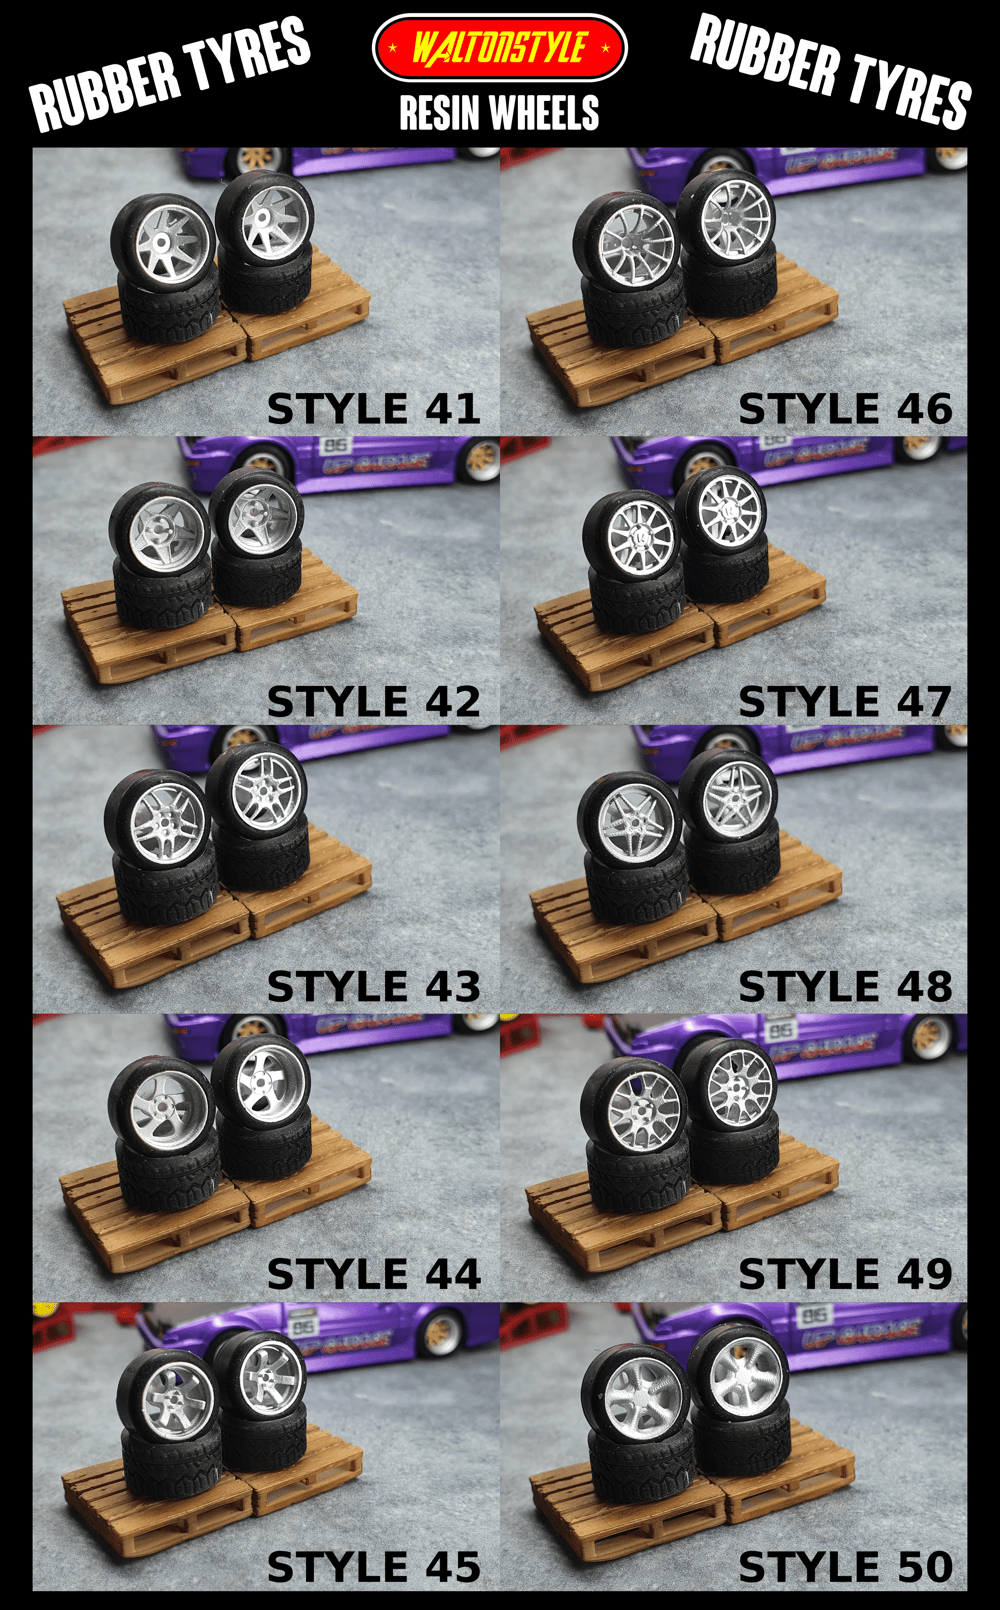  (GROUP 1) Rubber tyres with resin wheels  